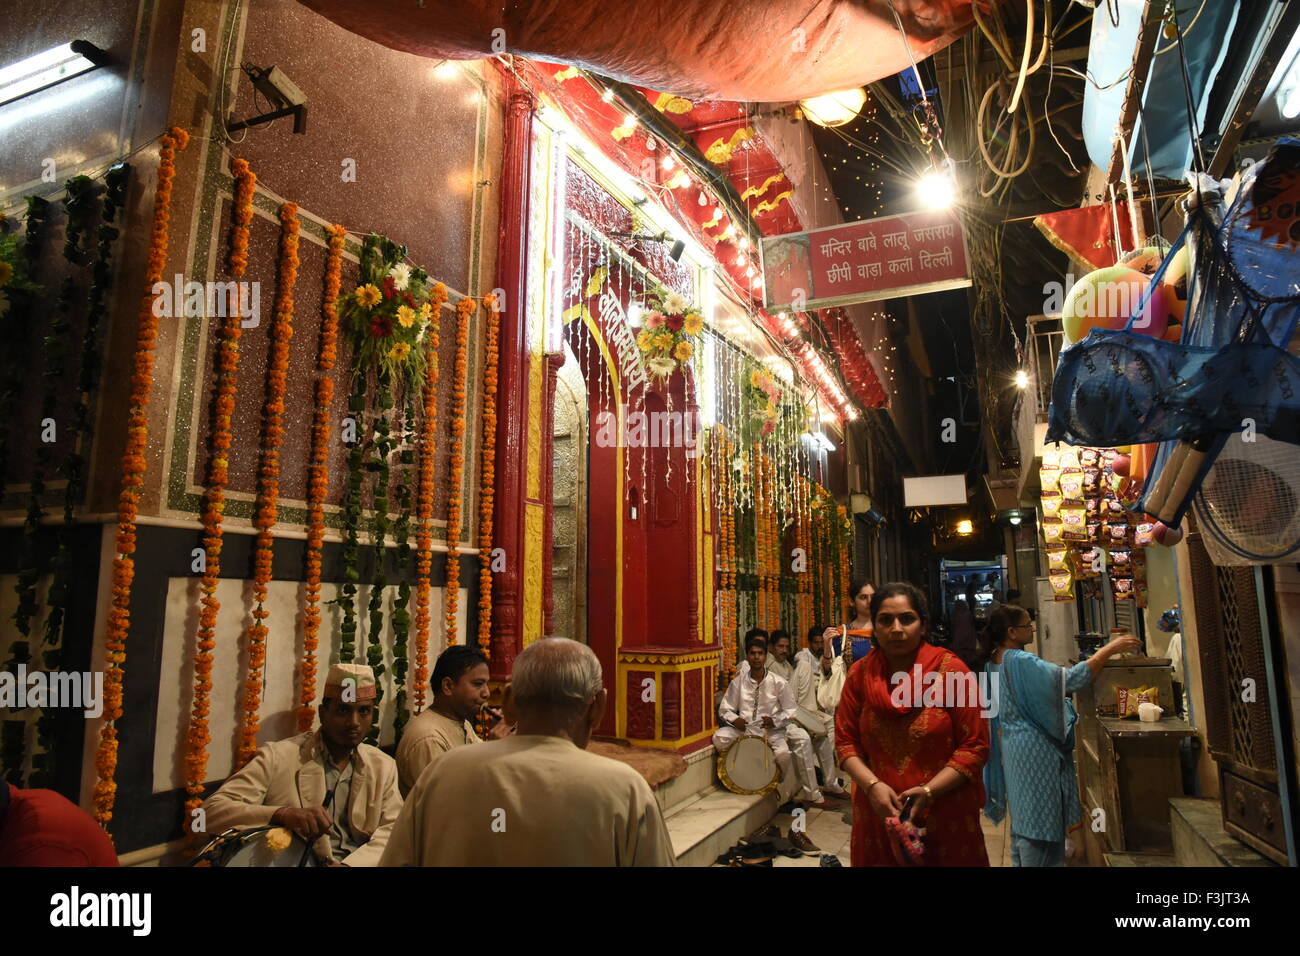 Baba Laloo or Lalu JasRai temple (Khatri Temple) outside decorated with flowers and lights during festival,old delhi,India,Asia Stock Photo